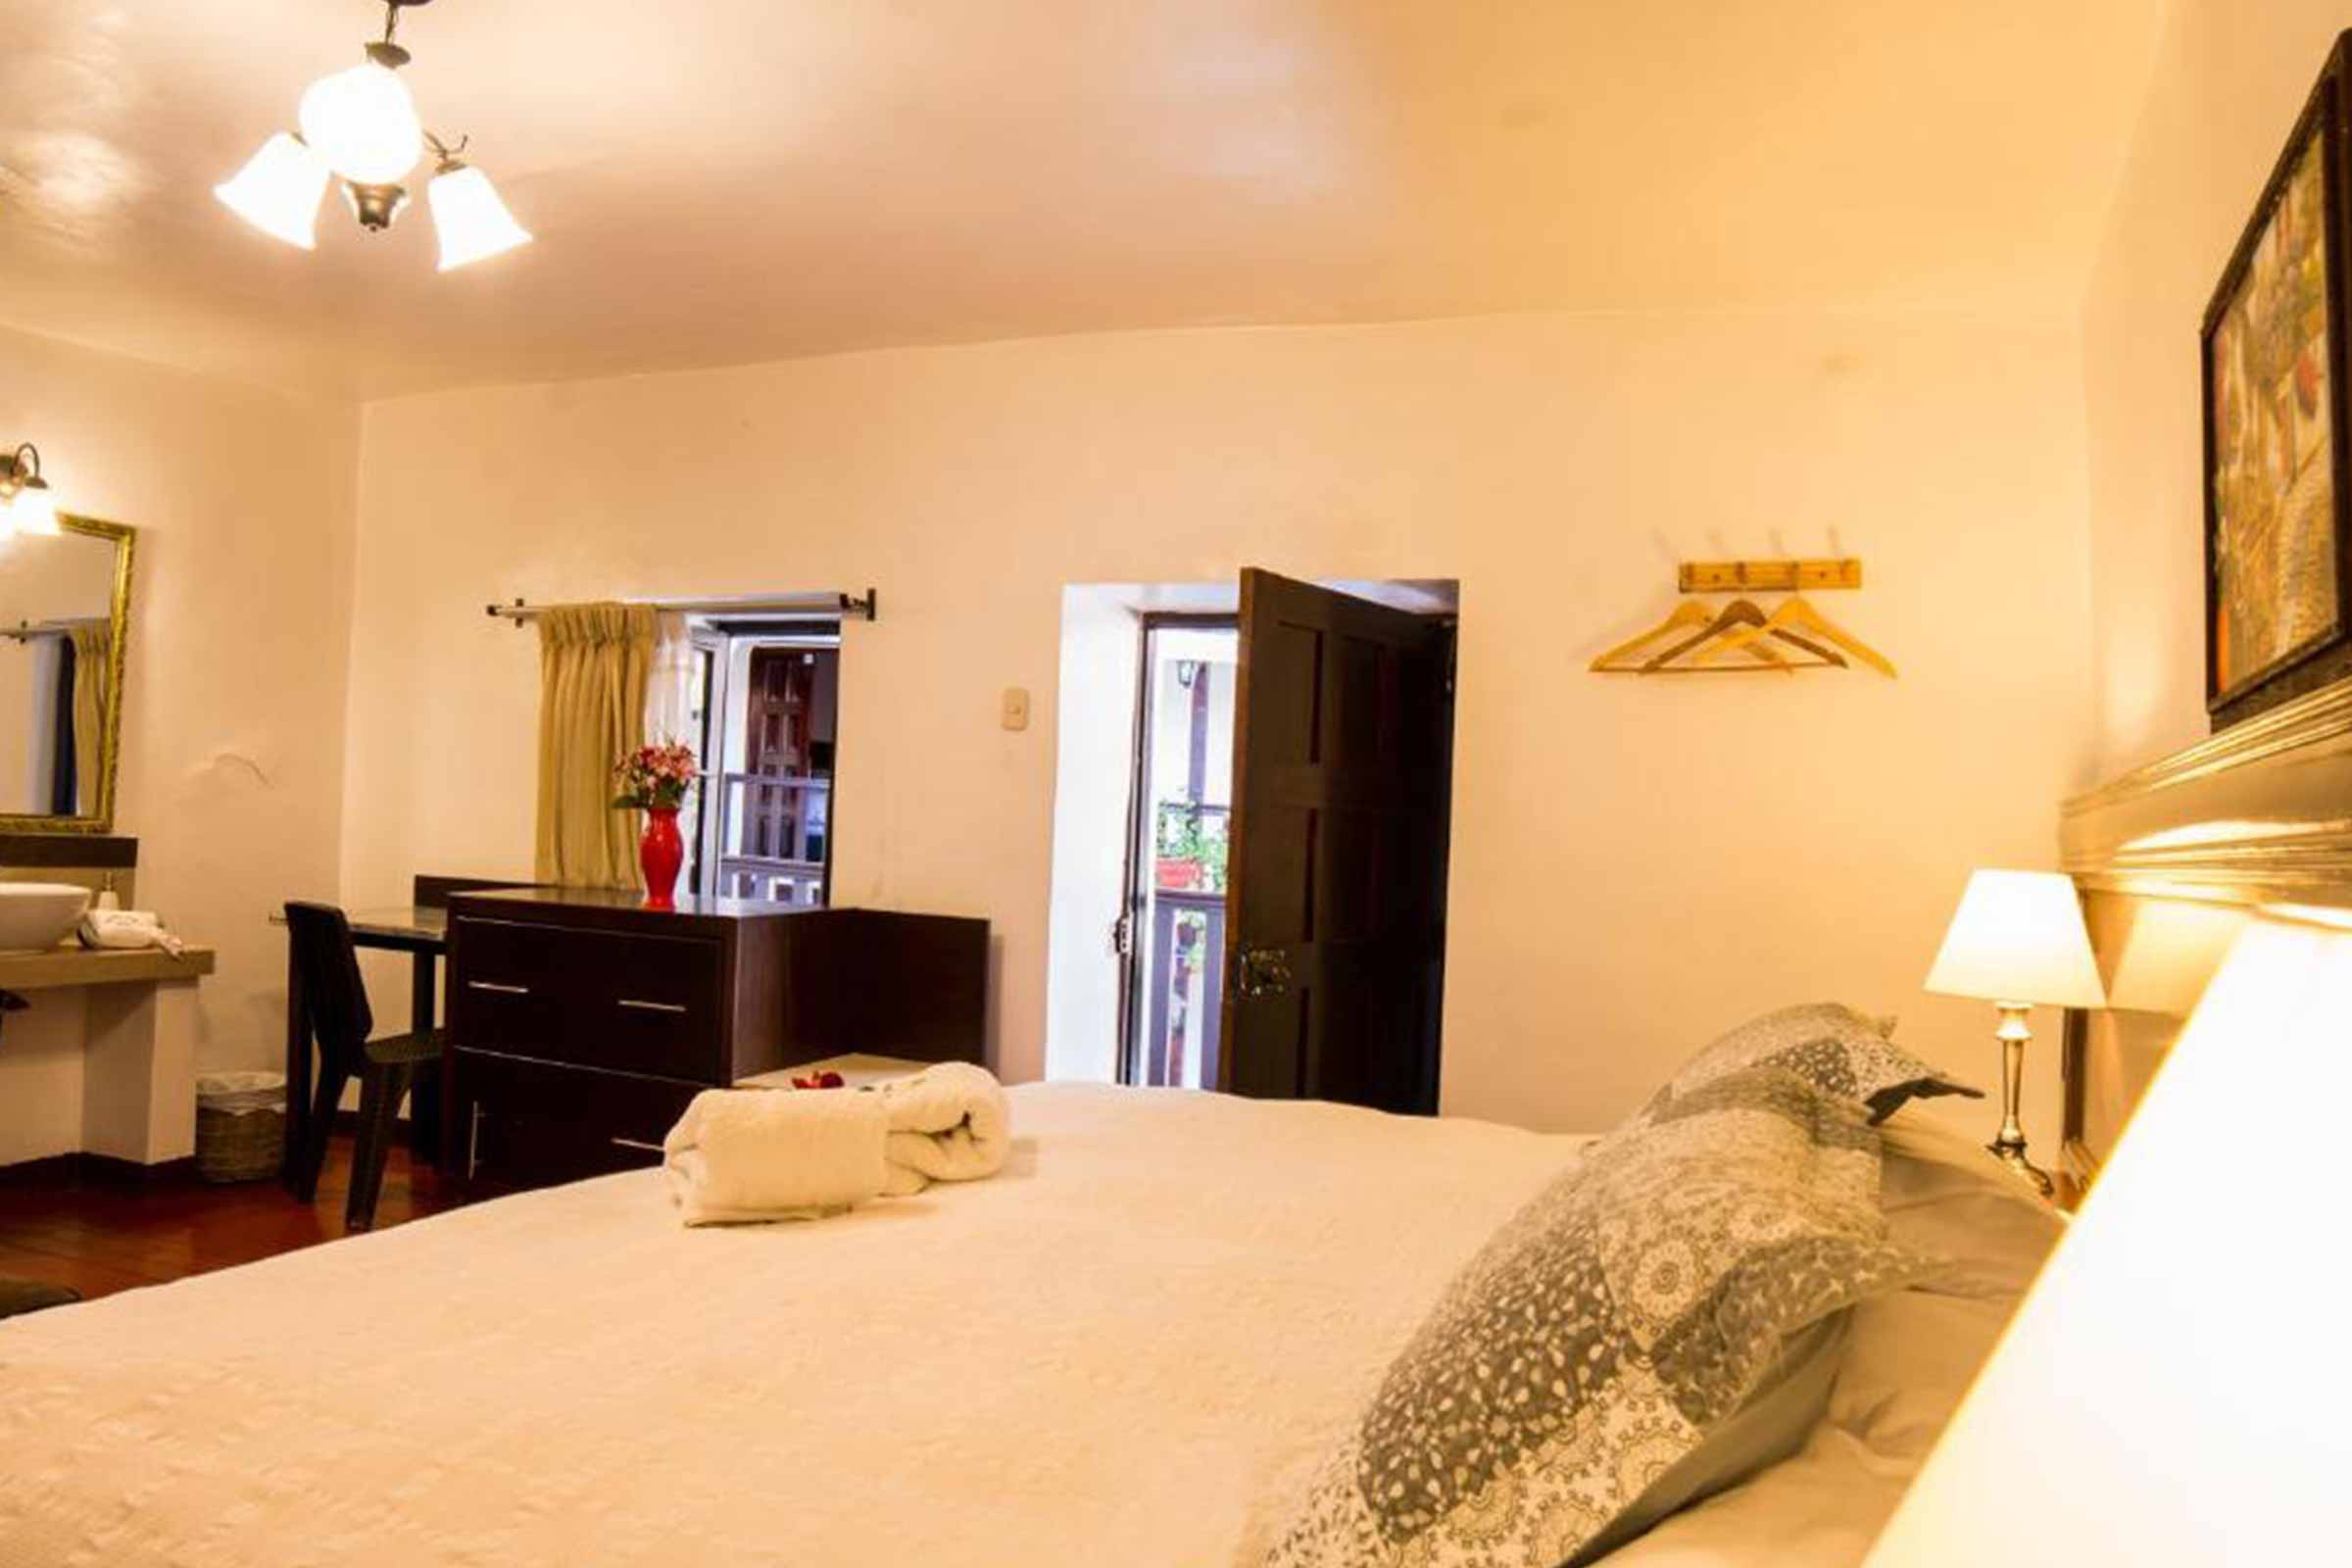 gringo bills Double Room with Private Bathroom (27)